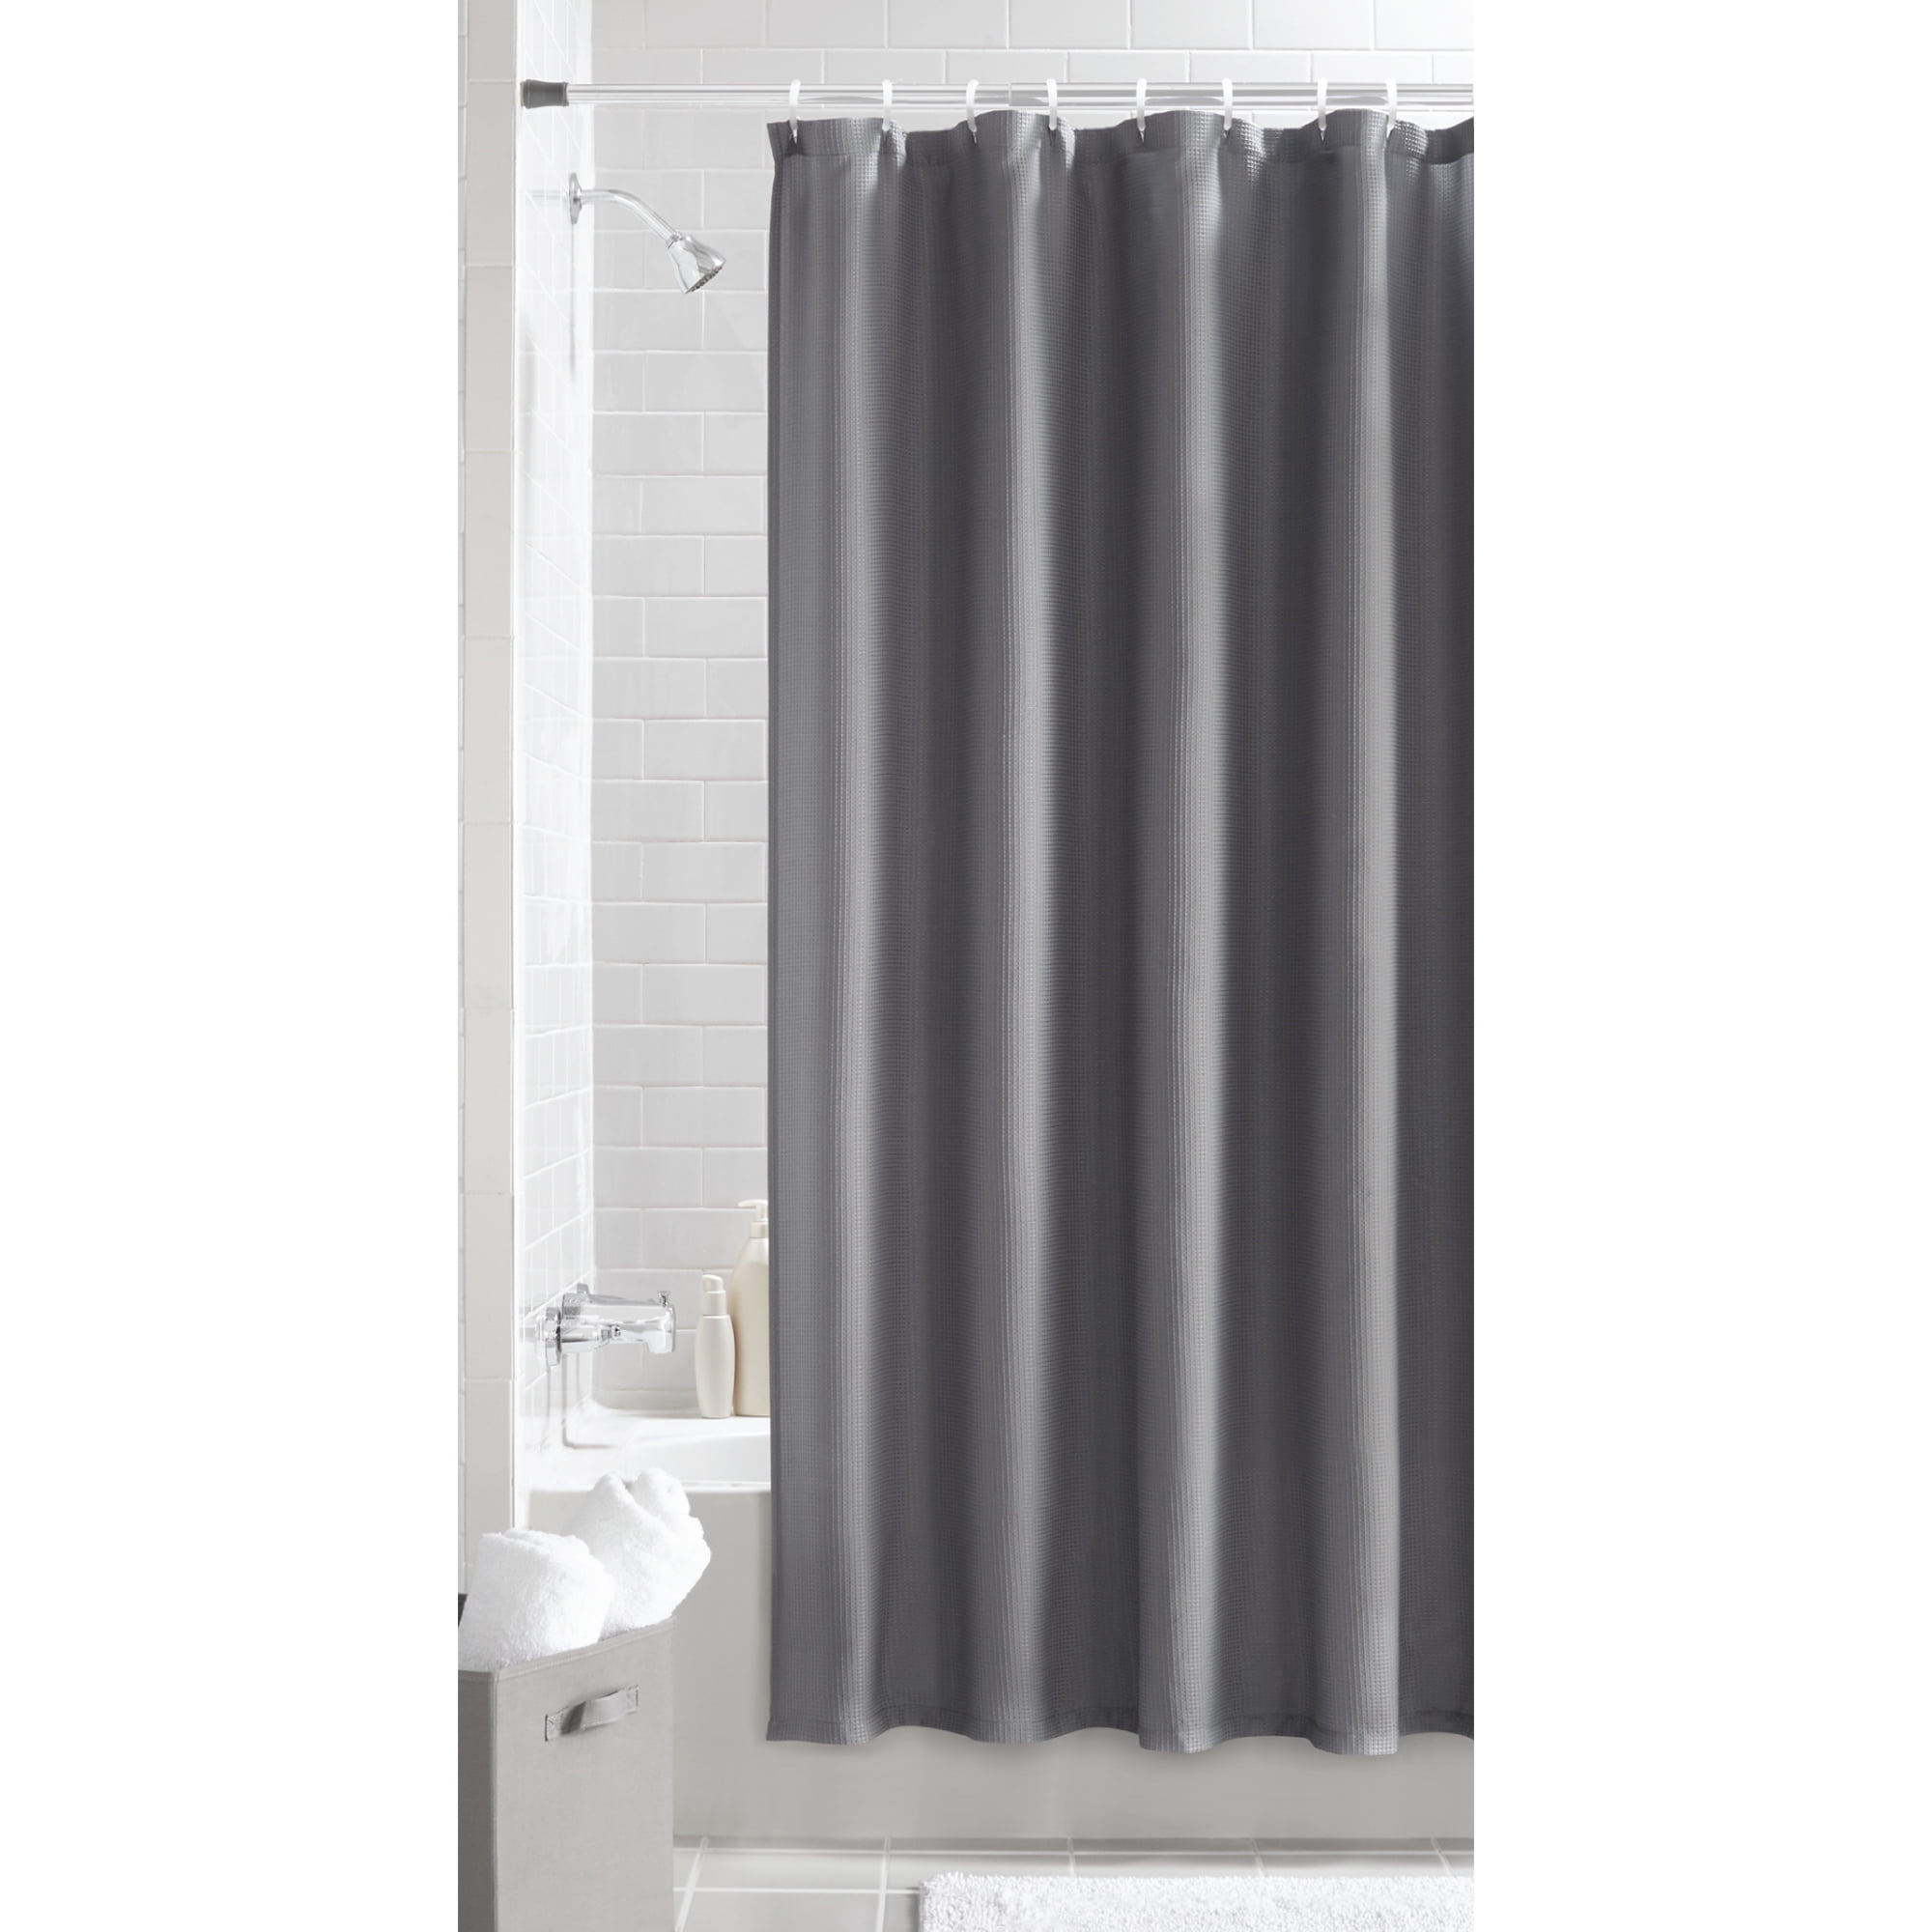 Details about   EurCross 78inch Long Shower Curtain Gray Waffle Weave Fabric Thick Hotel Luxury 